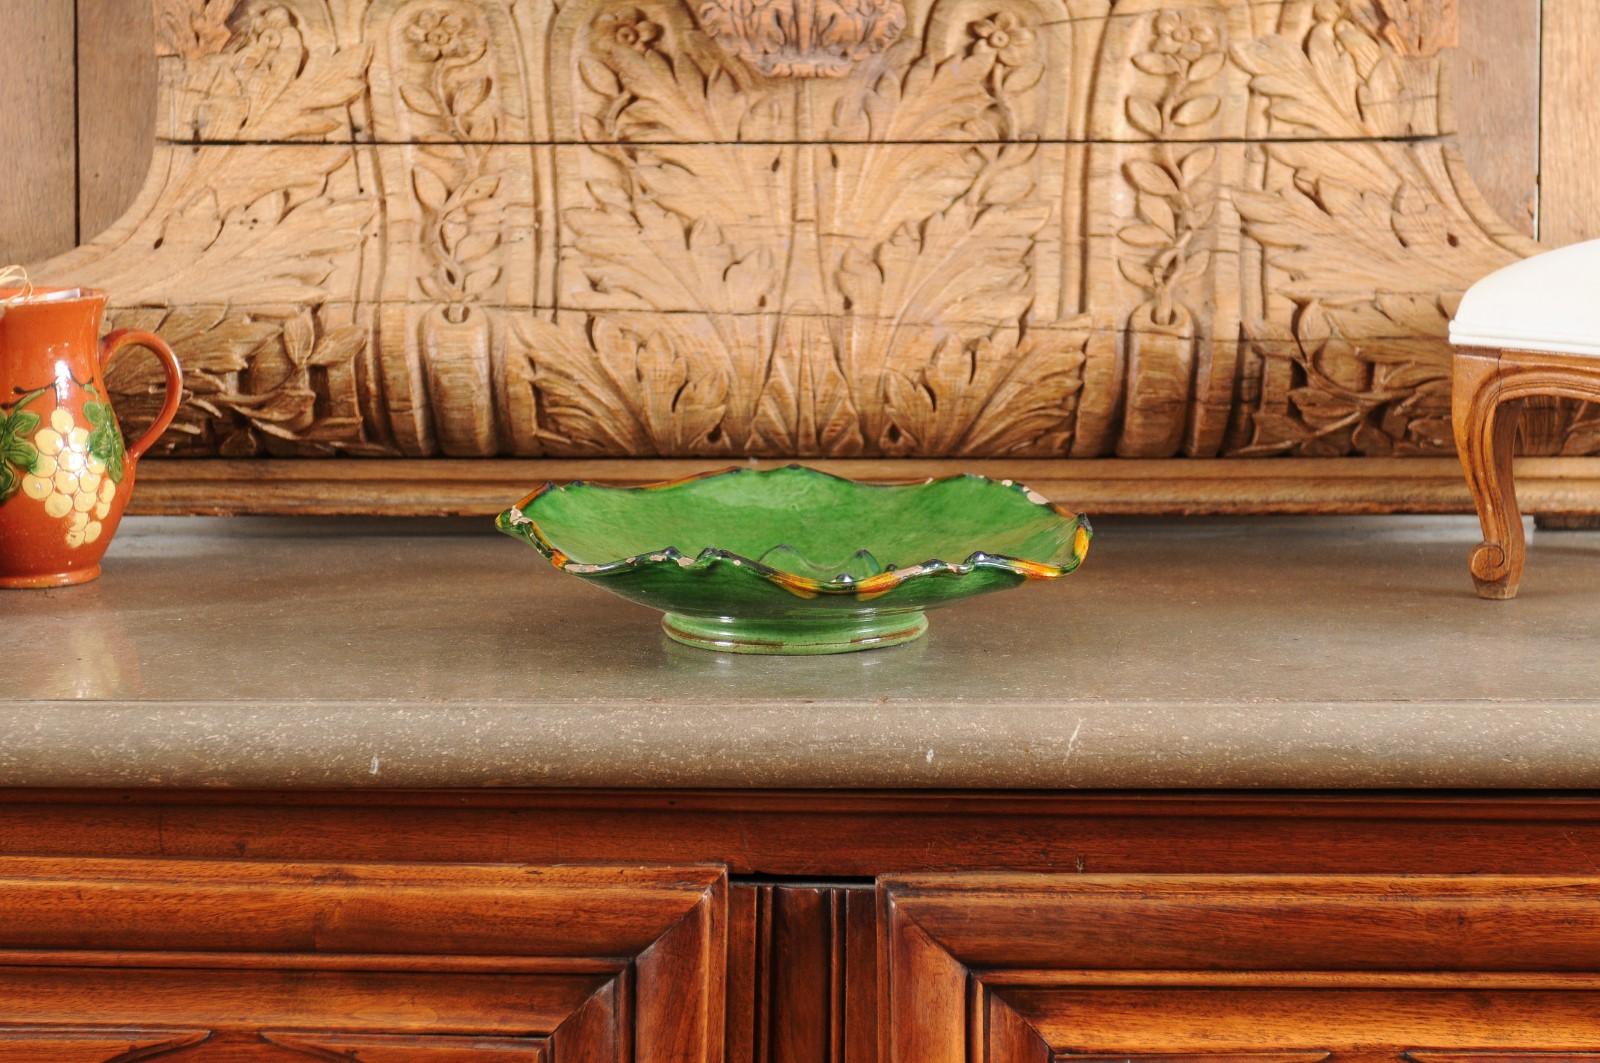 A French Provincial green glazed pottery Hors d'Œuvres dish from the mid 19th century, with scalloped edges and orange accents. Created in Provence during the reign of Emperor Napoléon III, this hors d'œuvres (appetizers) platter charms us with its